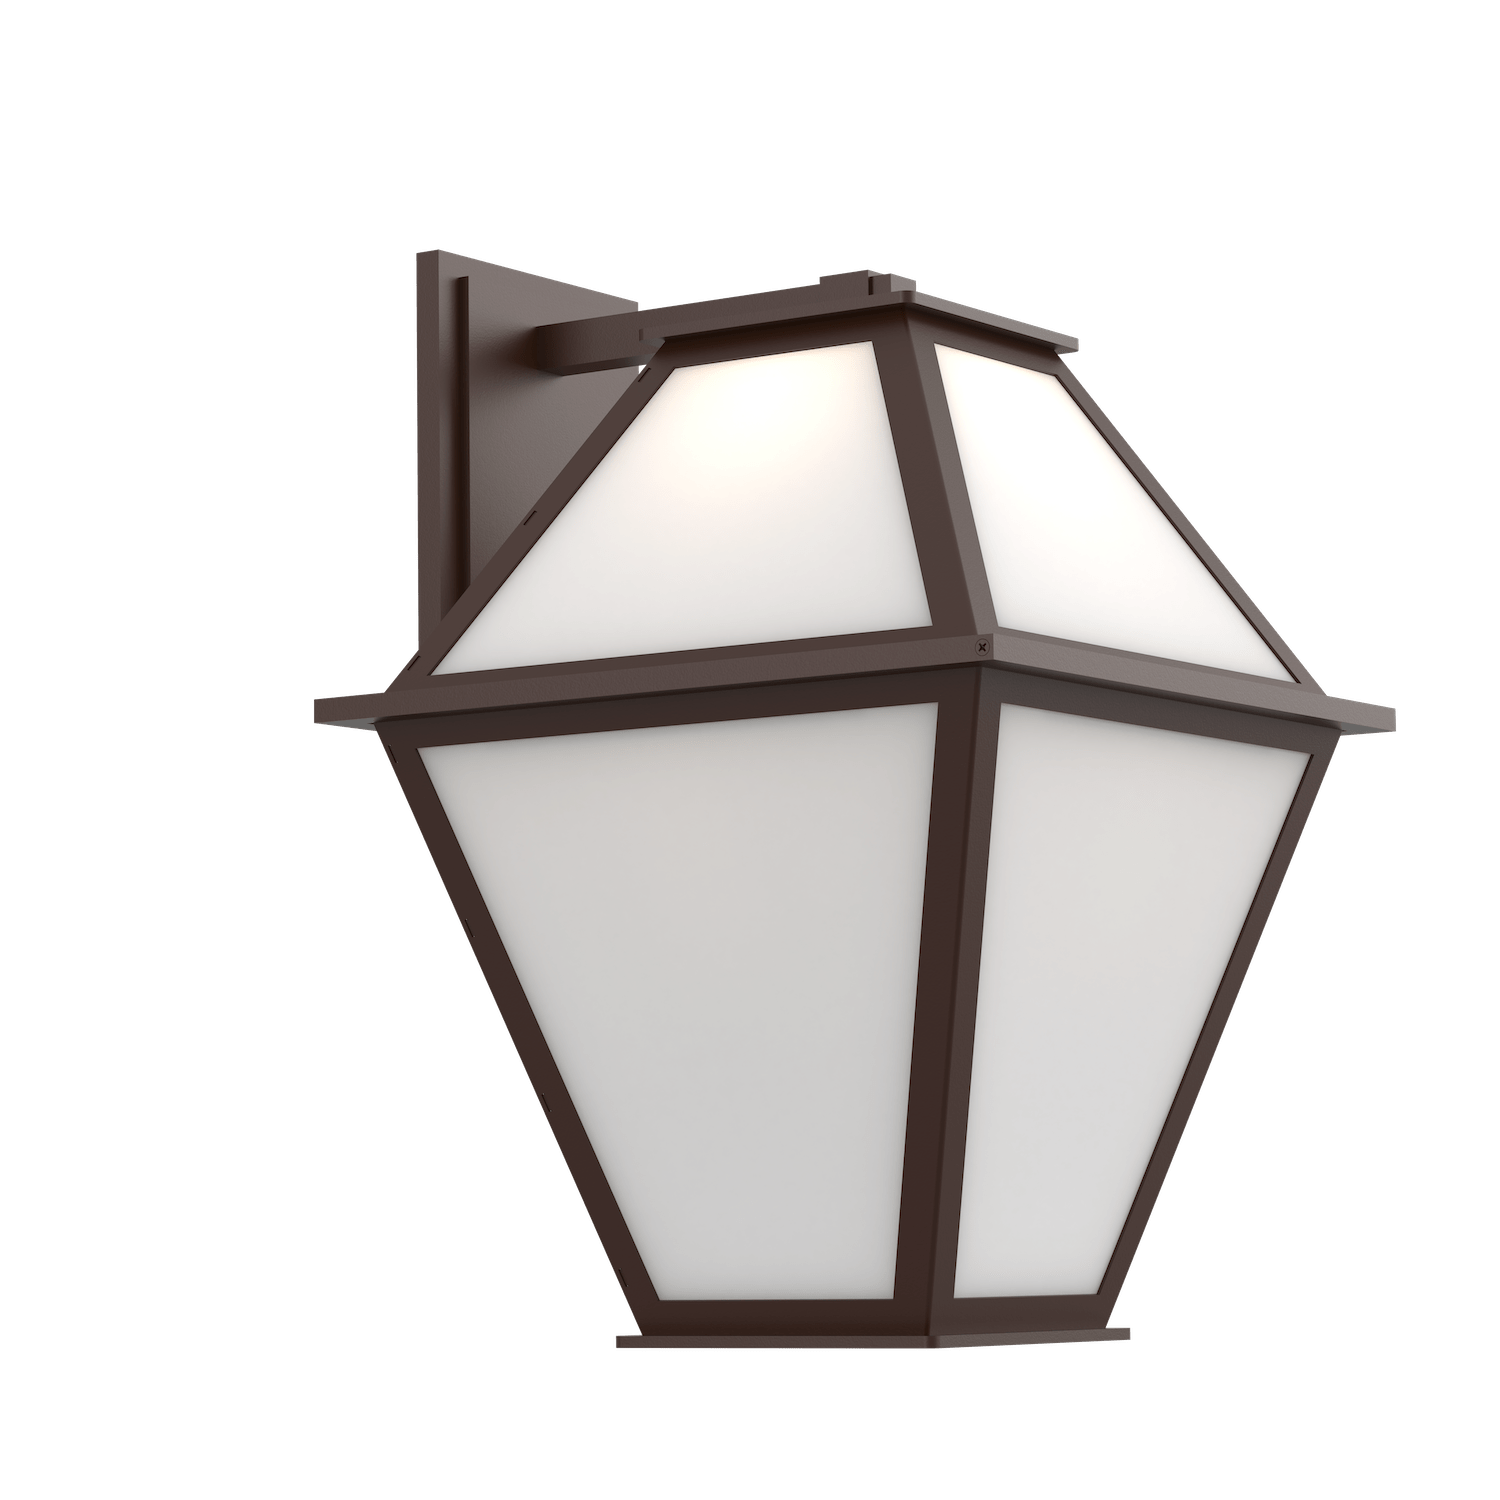 ODB0072-02-SB-FS-Hammerton-Studio-Terrace-24-inch-outdoor-frosted-lantern-with-statuary-bronze-finish-and-frosted-glass-shade-and-LED-lamping